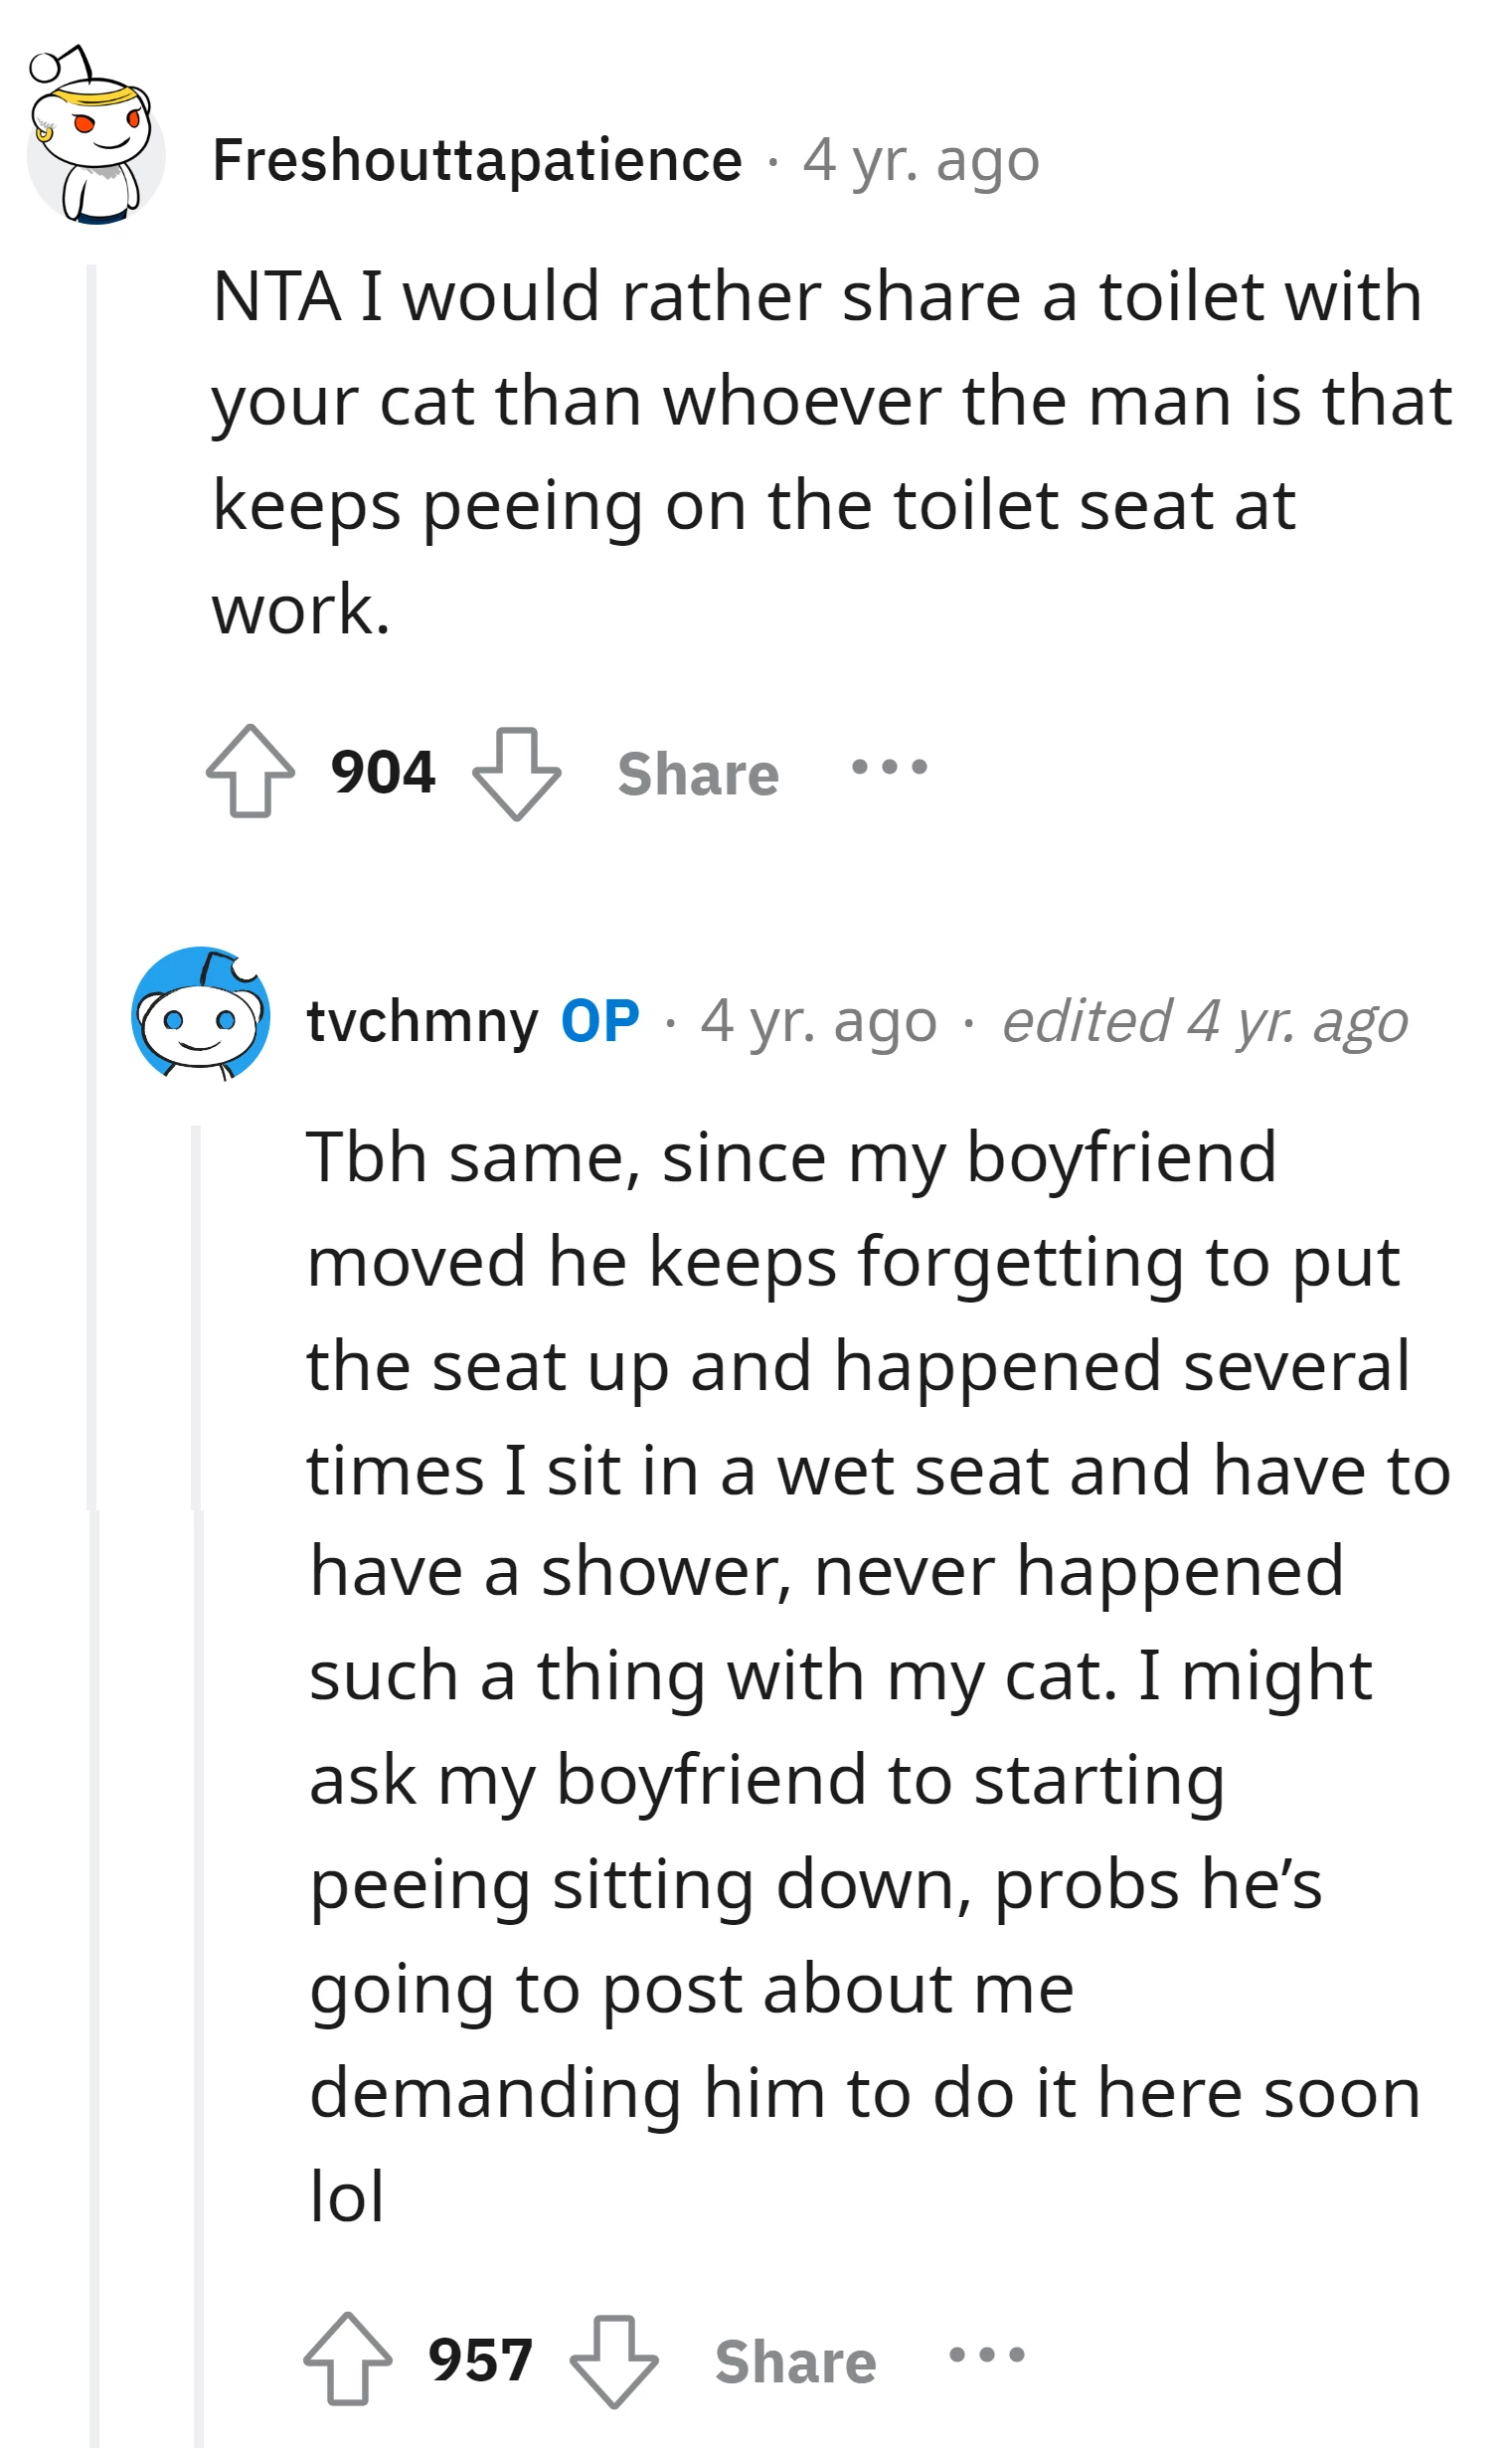 Commenter prefers sharing a toilet with the OP's cat